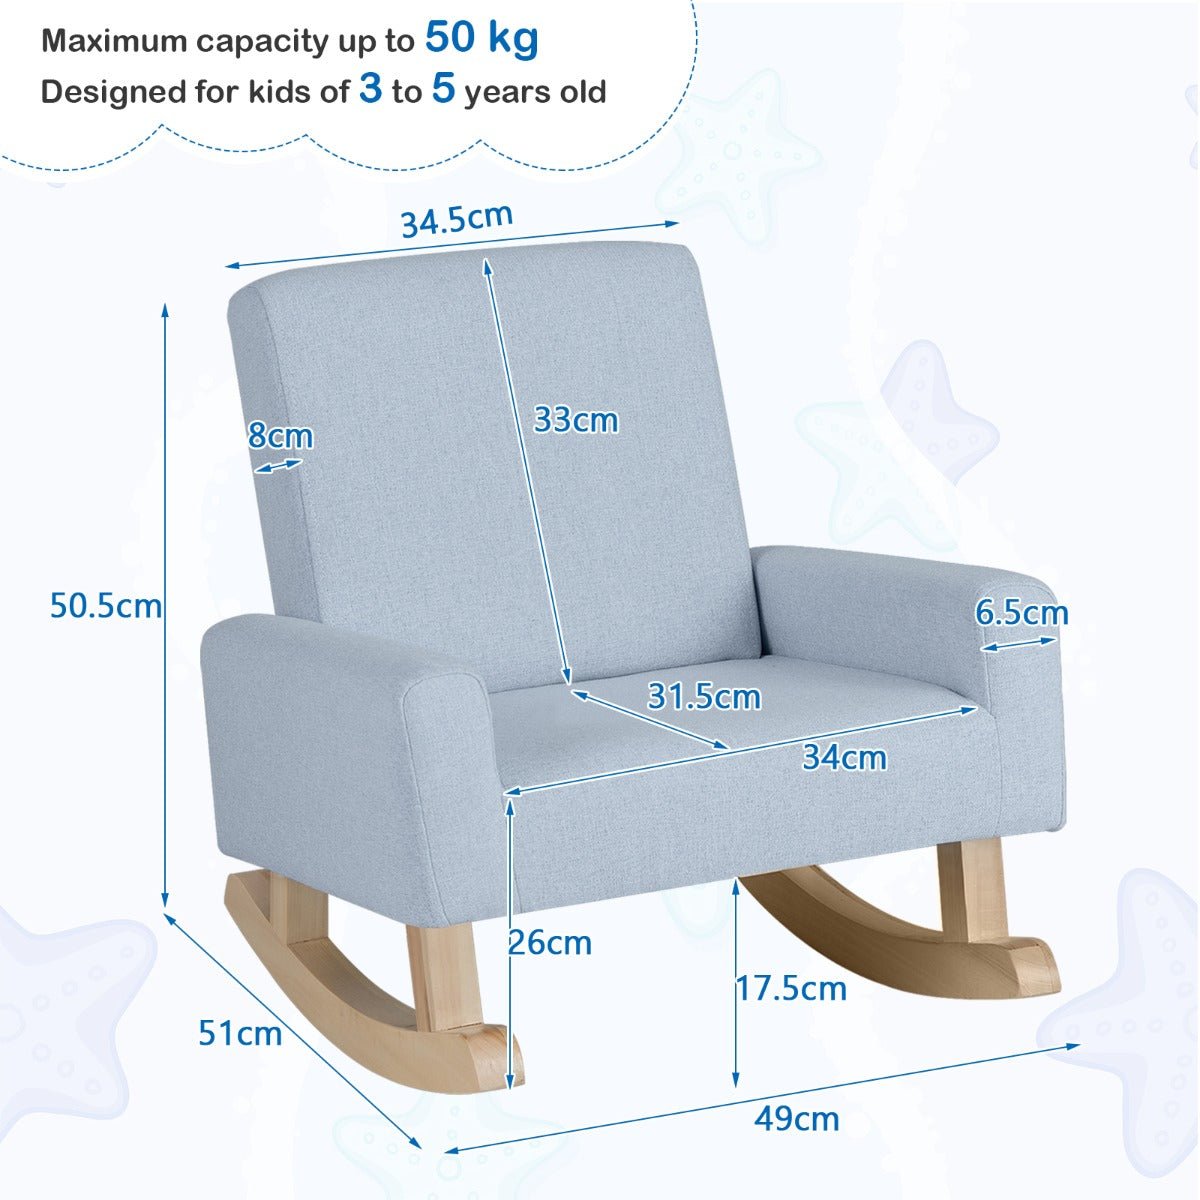 Rocking Chair for Kids - Blue, Wood Legs, Anti-tipping Design for Safety